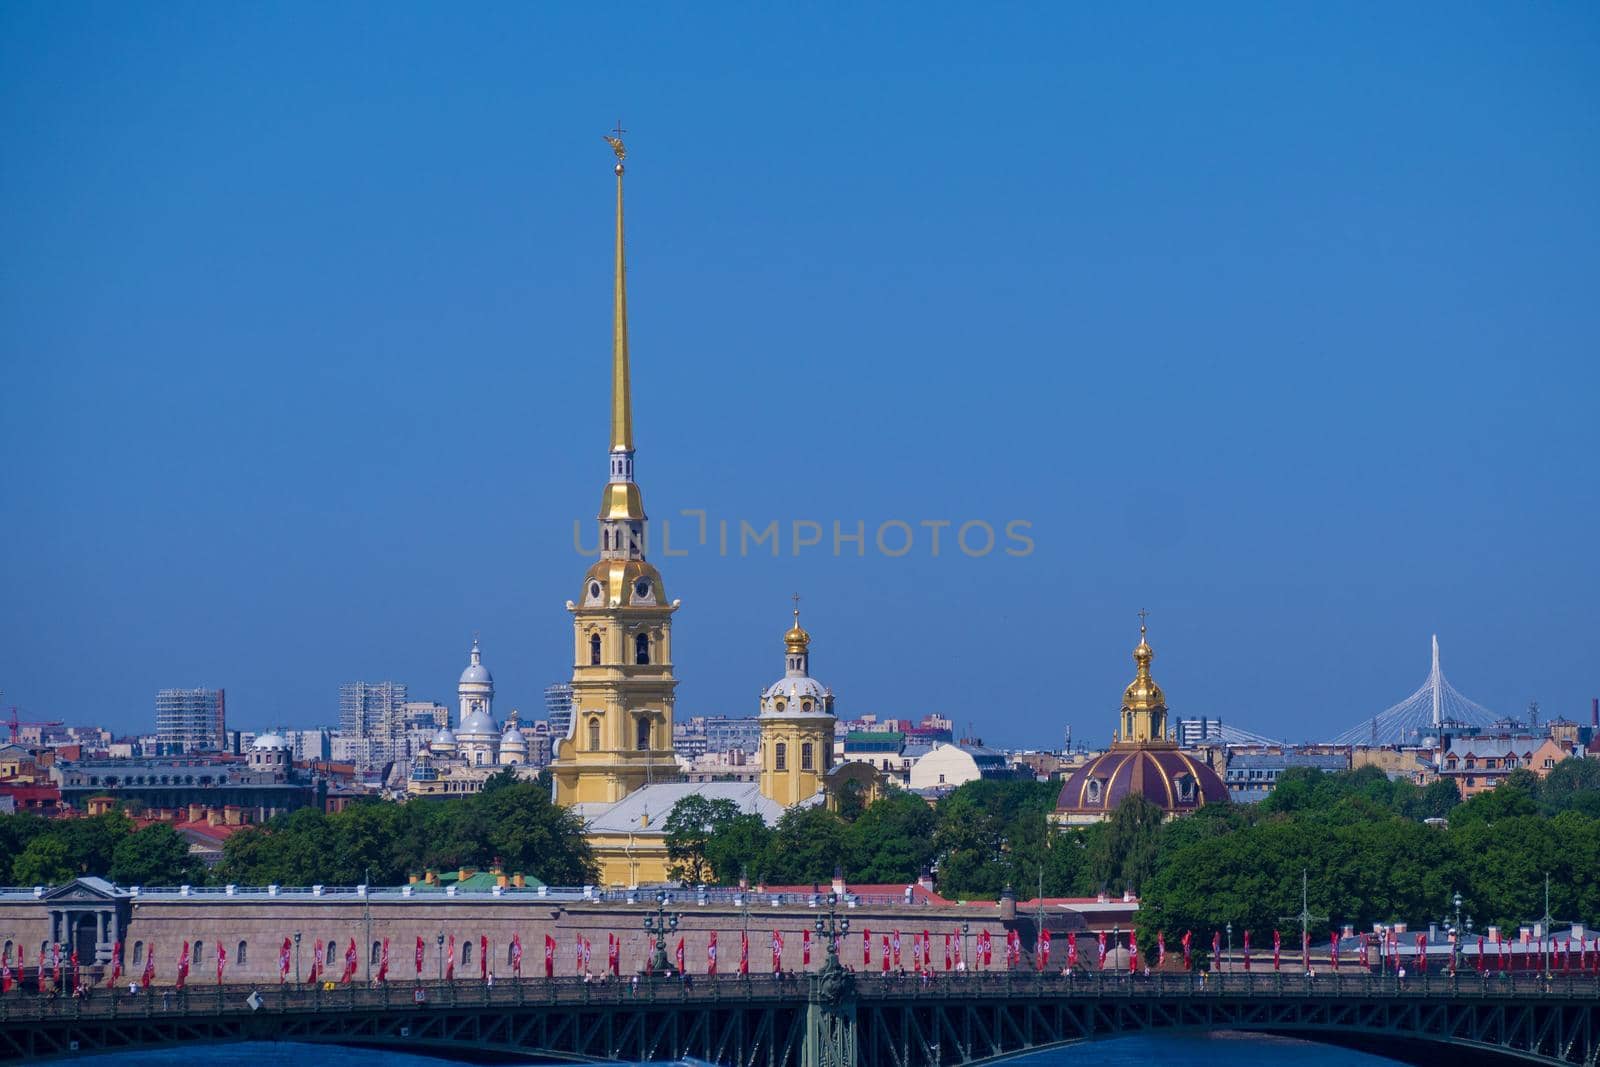 RUSSIA, SAINT PETERSBURG - 06.09.20: Peter-Pavel's Fortress on Rabbit Island in Saint Petersburg, Russia by Andre1ns